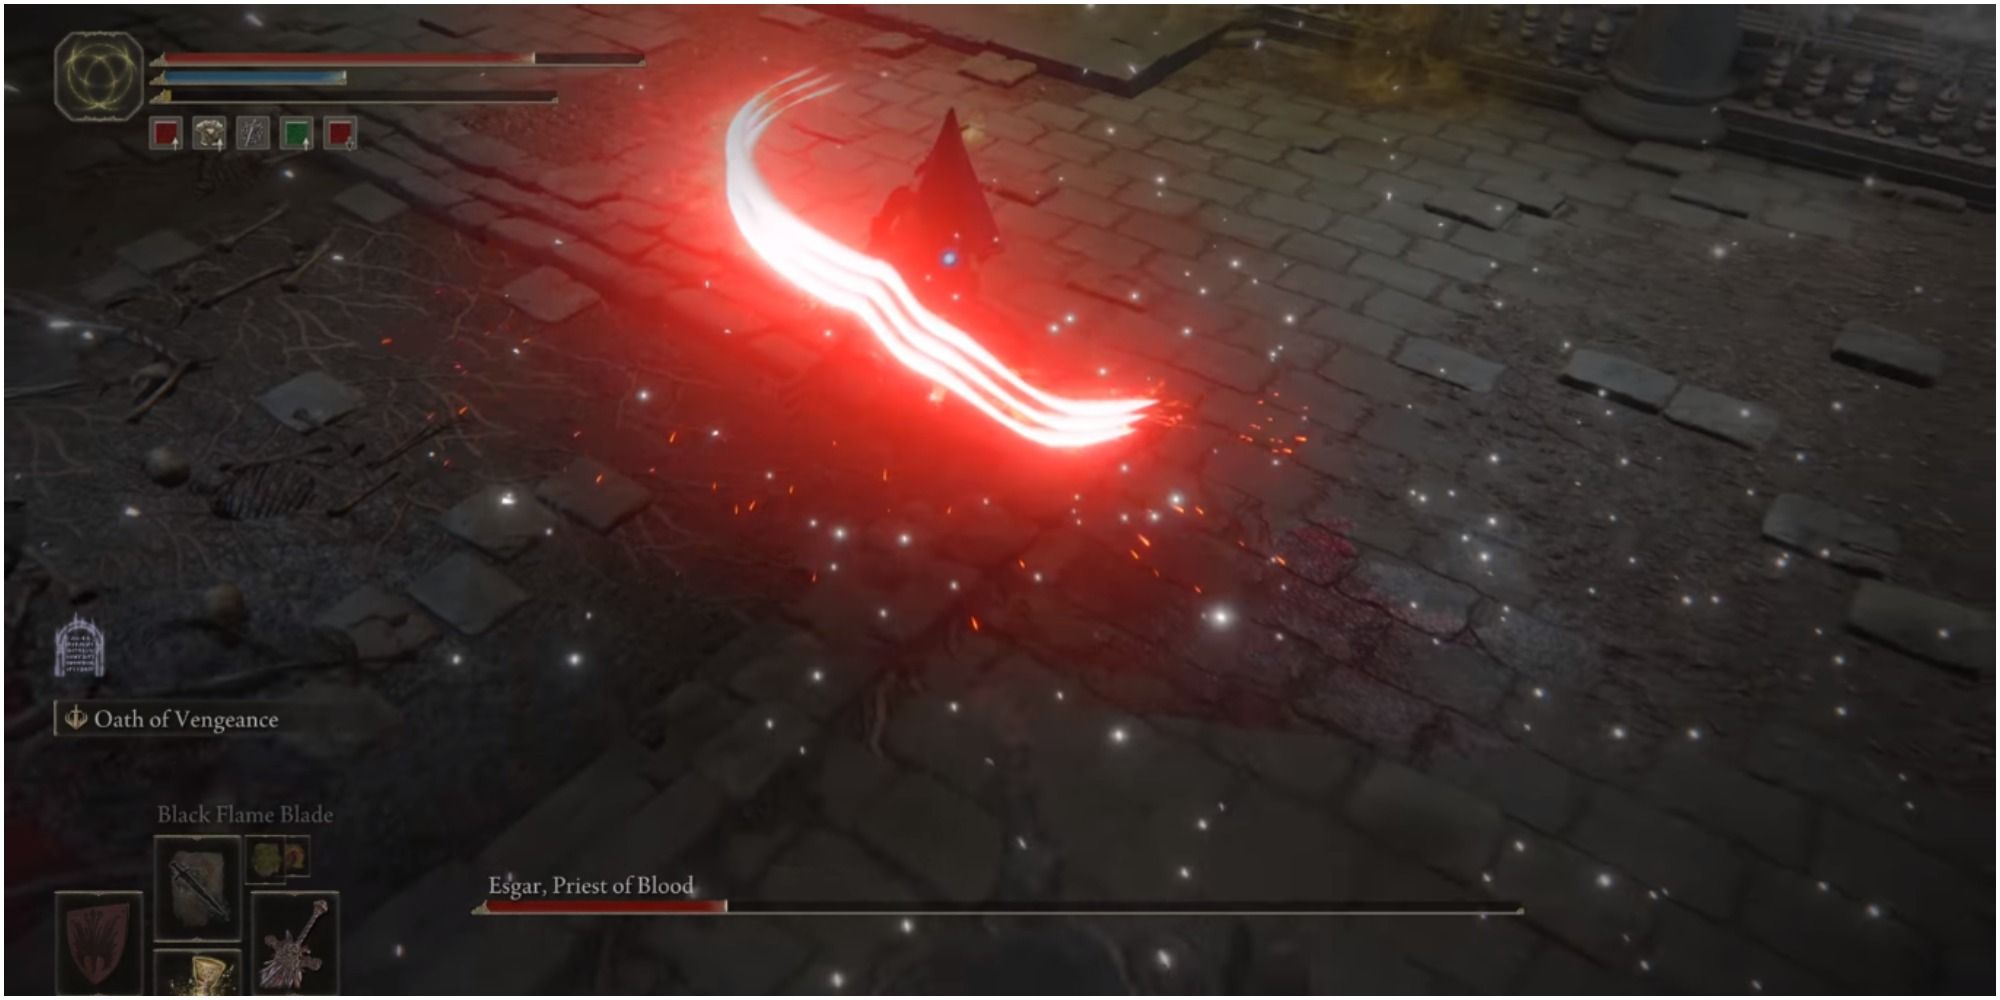 The boss doing a Bloodflame claw animation on the player.